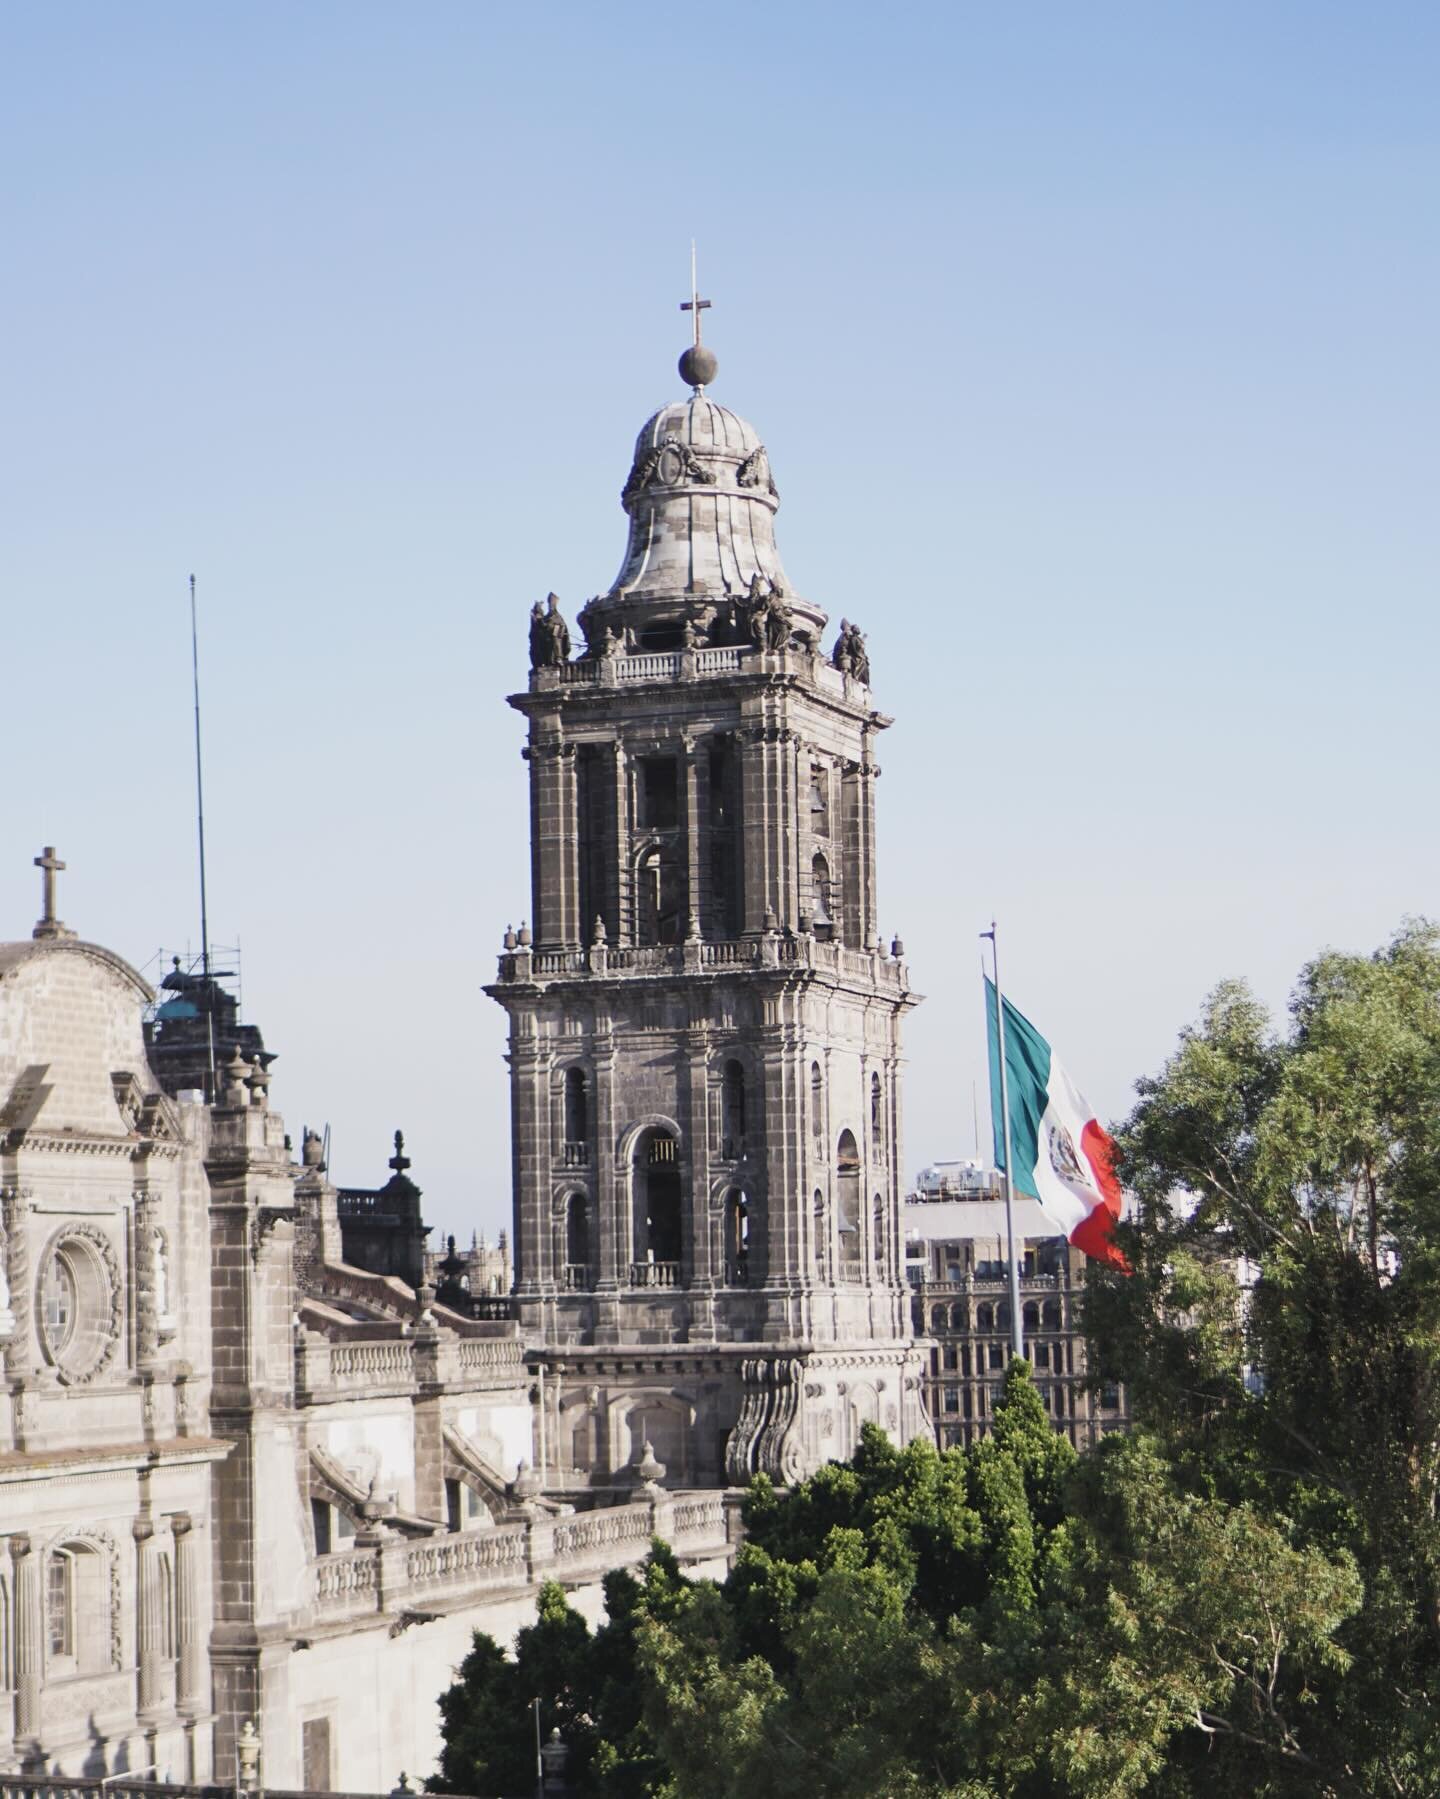 In May I went back to Mexico City. 

I have really felt in the past few years that I&rsquo;m not a city person, that I&rsquo;m always looking to get deeper into nature. But CDMX flipped that for me. Maybe I just needed to find the right city. 

After